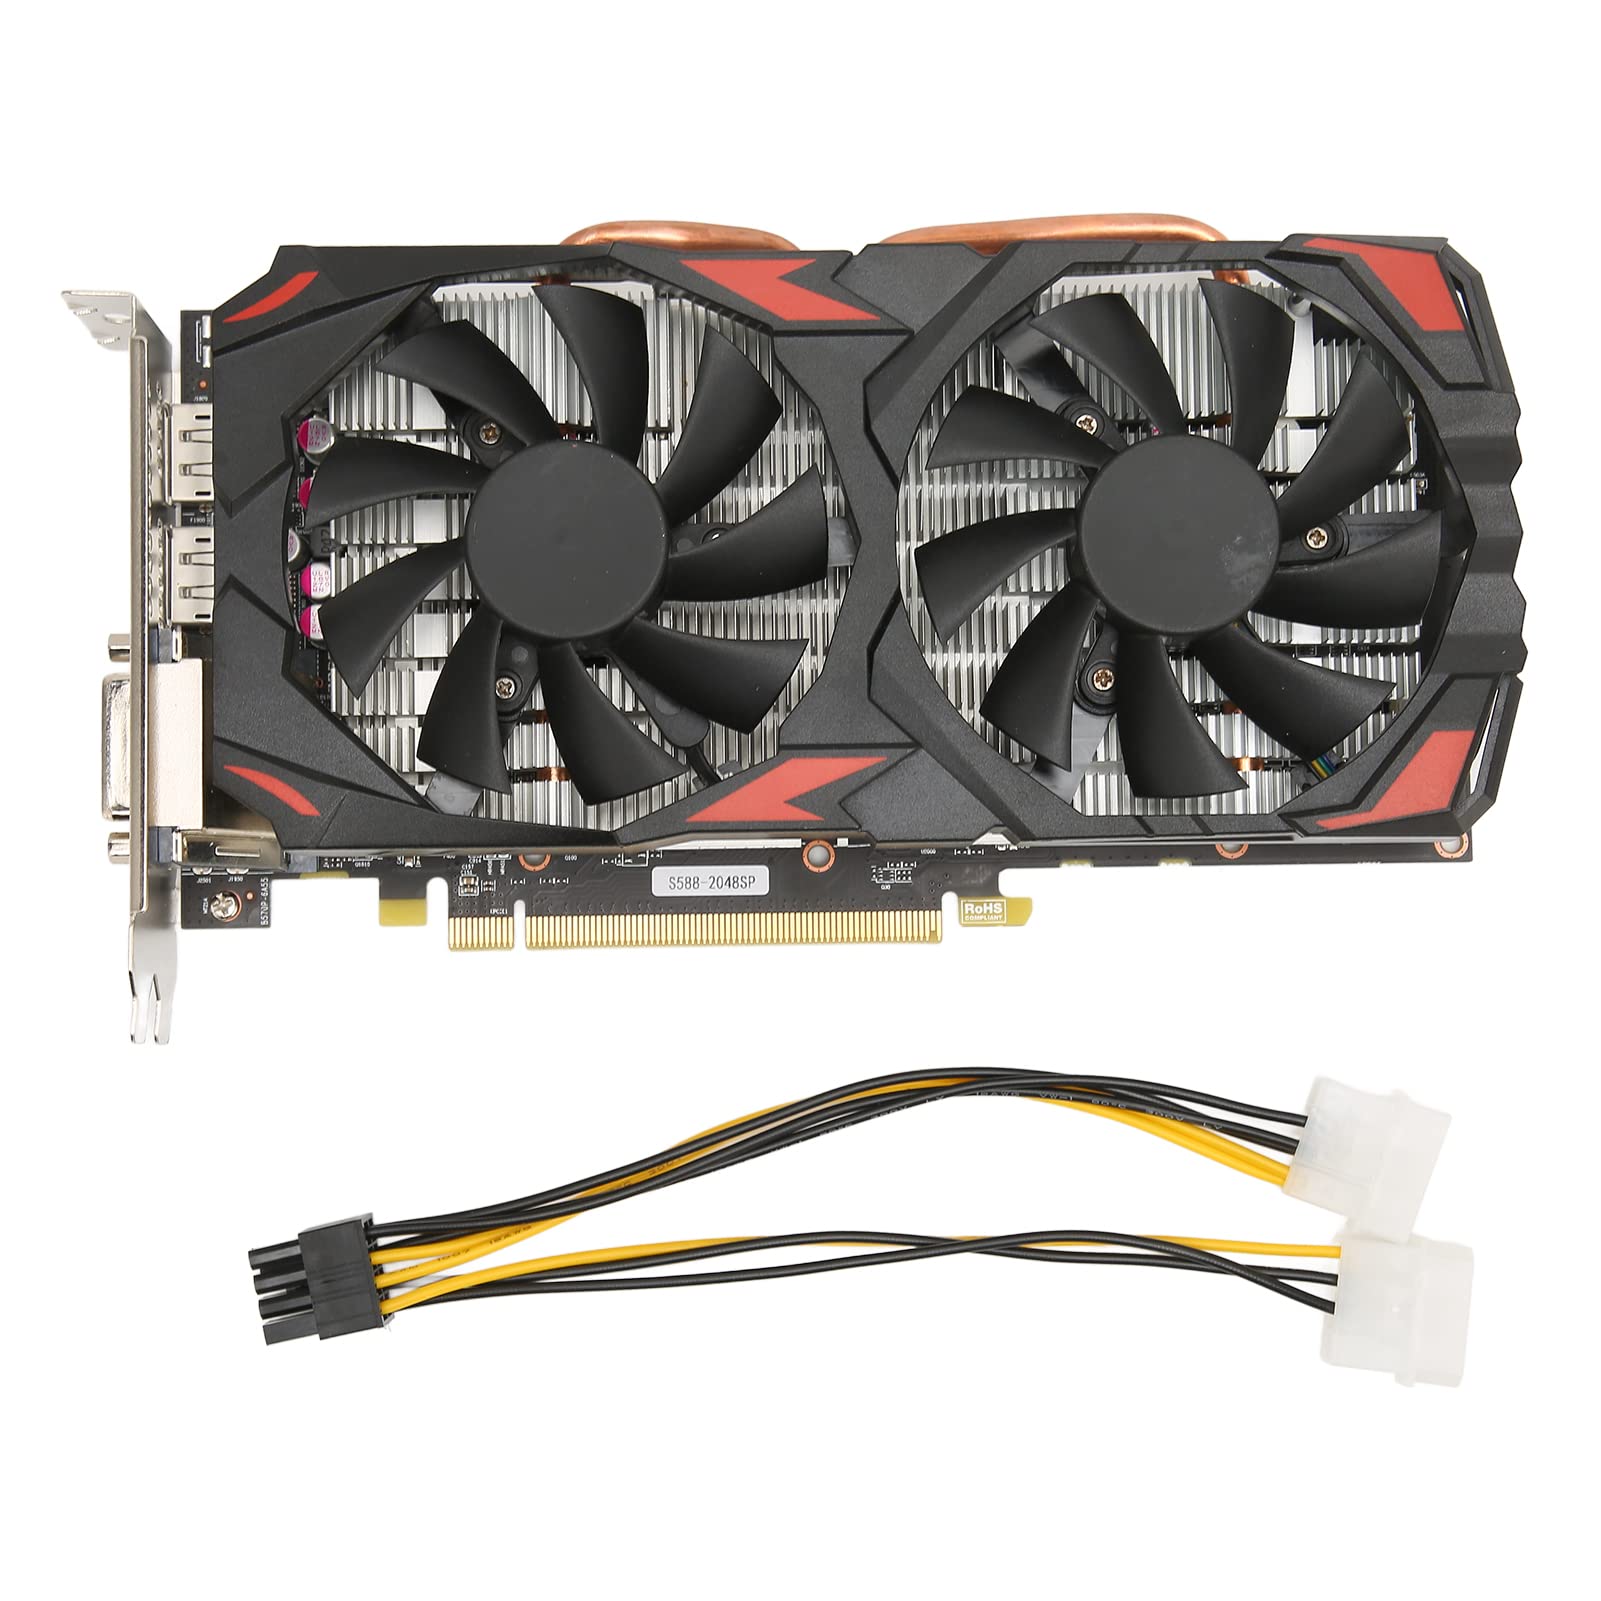 RX 580 8GB GDDR5 Graphics Card 256bit 7000 MHz 8K PCI Express 3.0 Gaming Graphics Card with Dual Cooling Fans DP HDMI DVI D